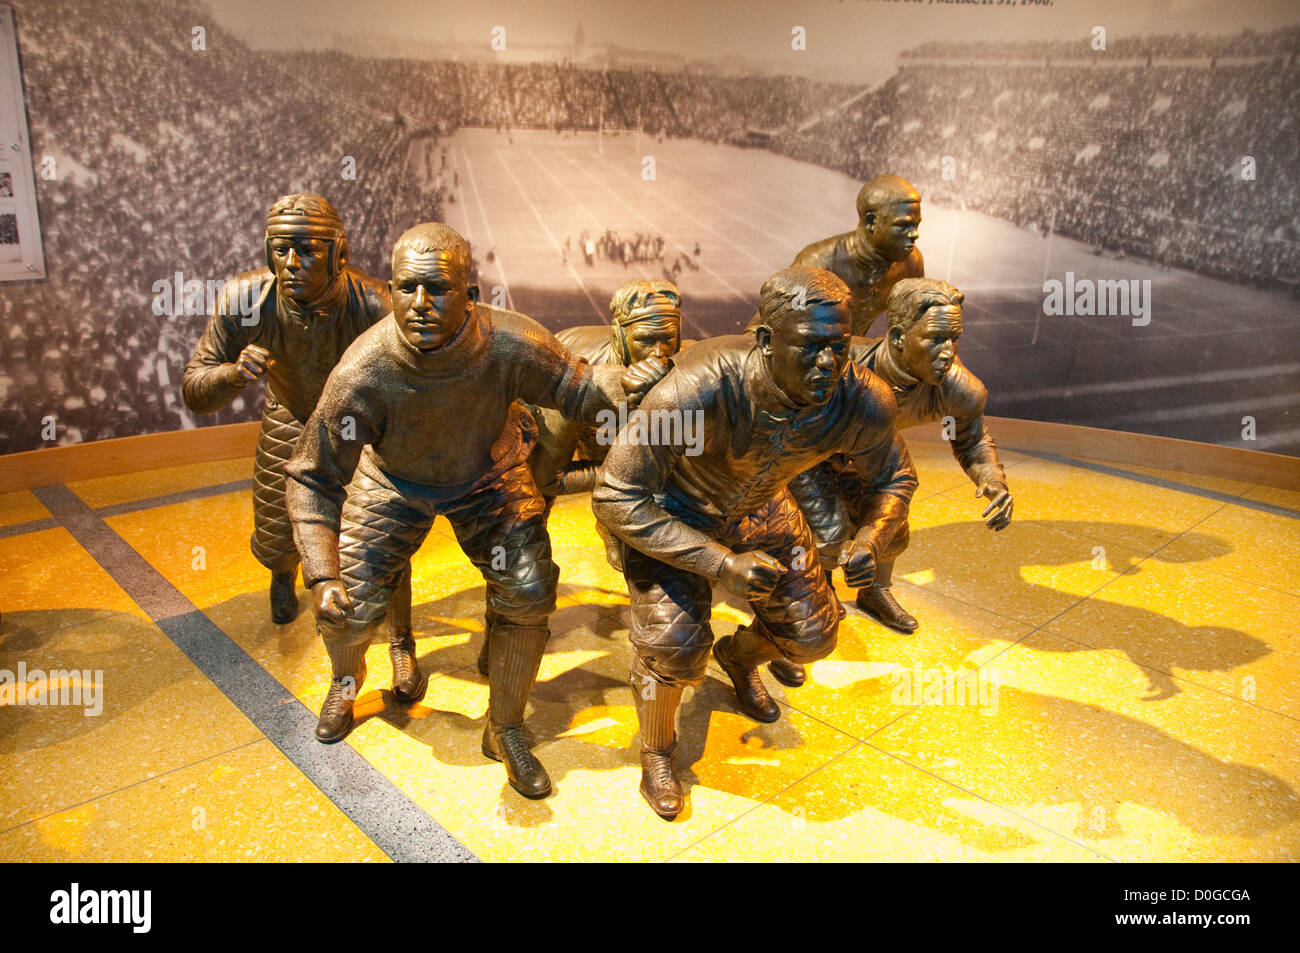 USA, Indiana, Indianapolis, Hall of Champions, National Collegiate Athletic Association Museum Fußball fliegende Keil-formation Stockfoto